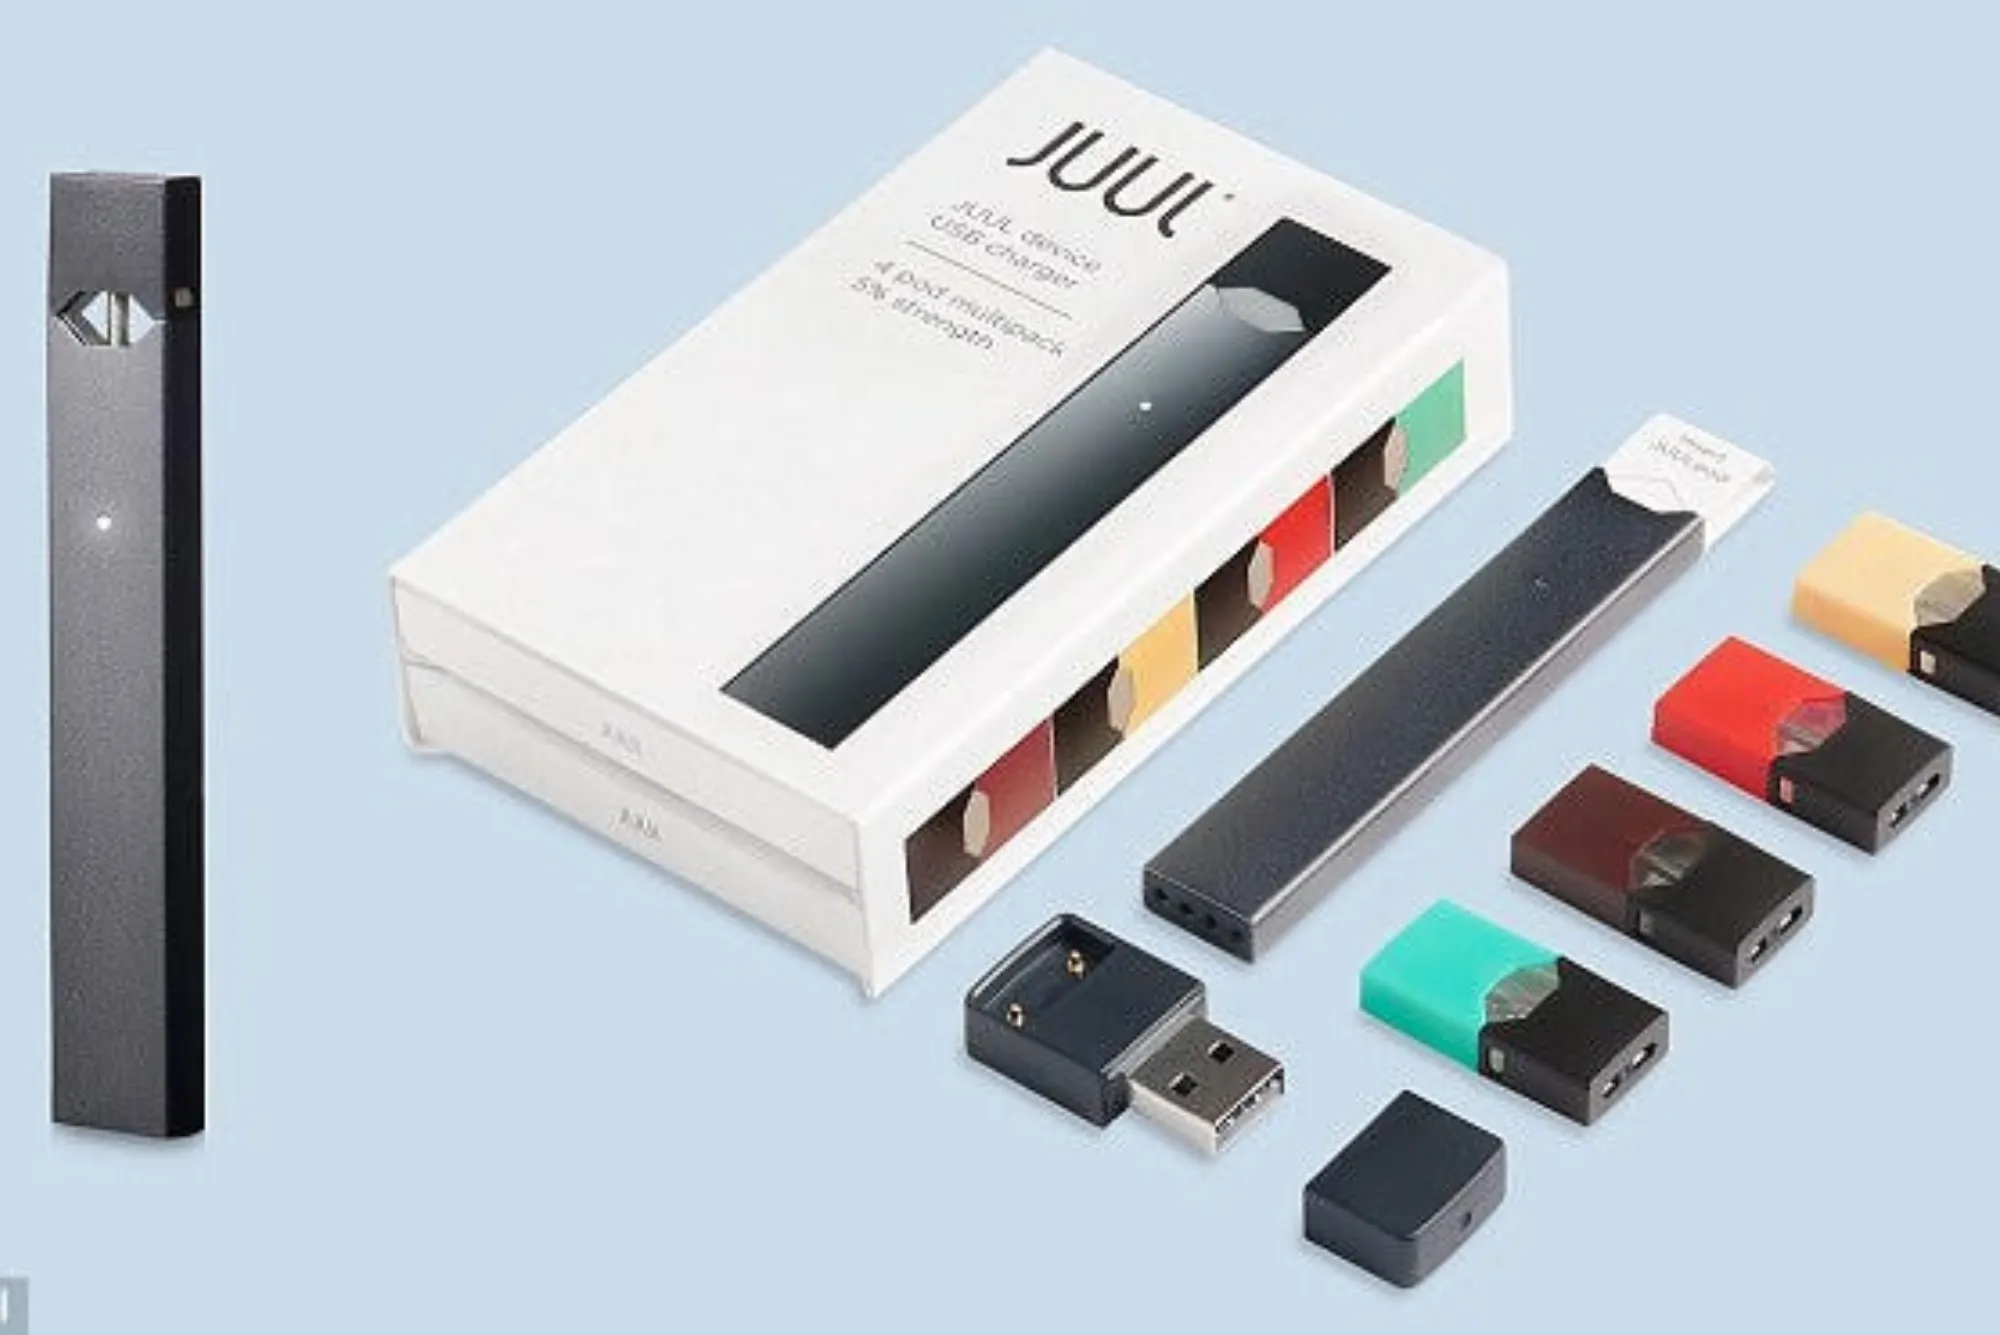 Buy Juul in Dubai: Where to Find Your Favorite Vape Products